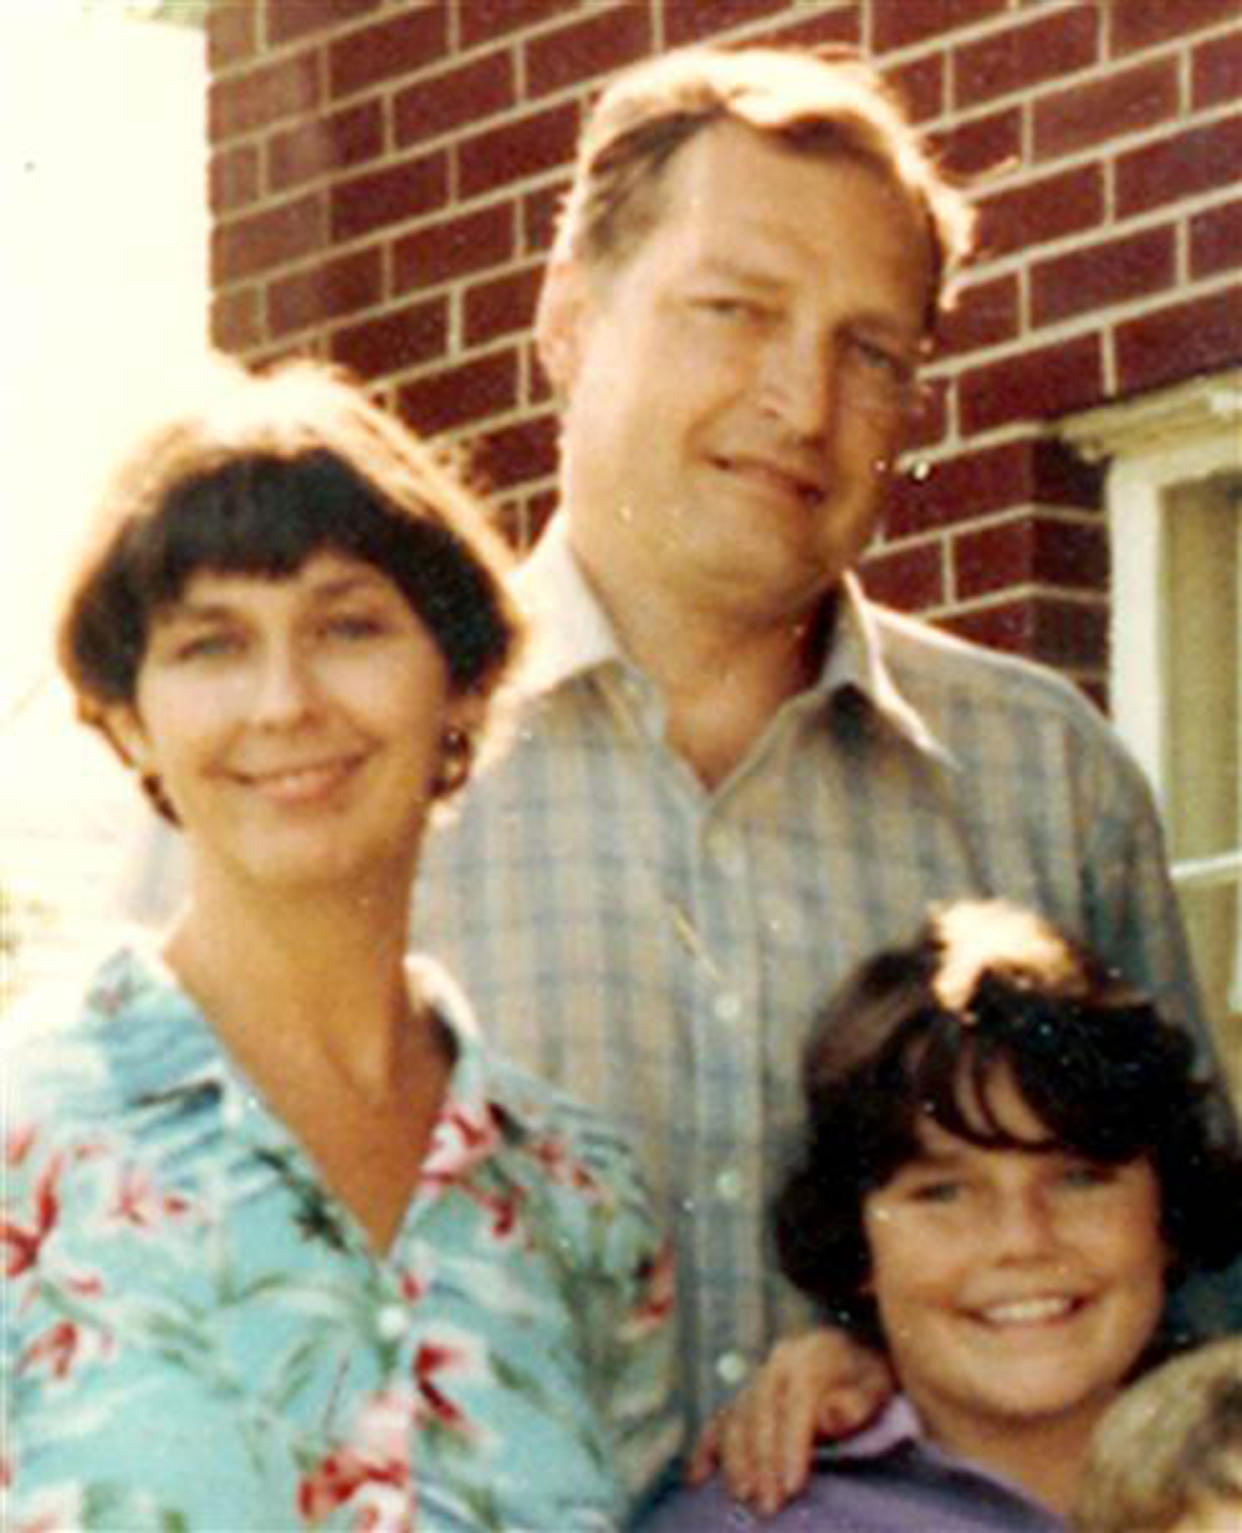 Savannah Guthrie is pictured next to her mother, Nancy, and father, Charles, in this vintage family photo. (TODAY)